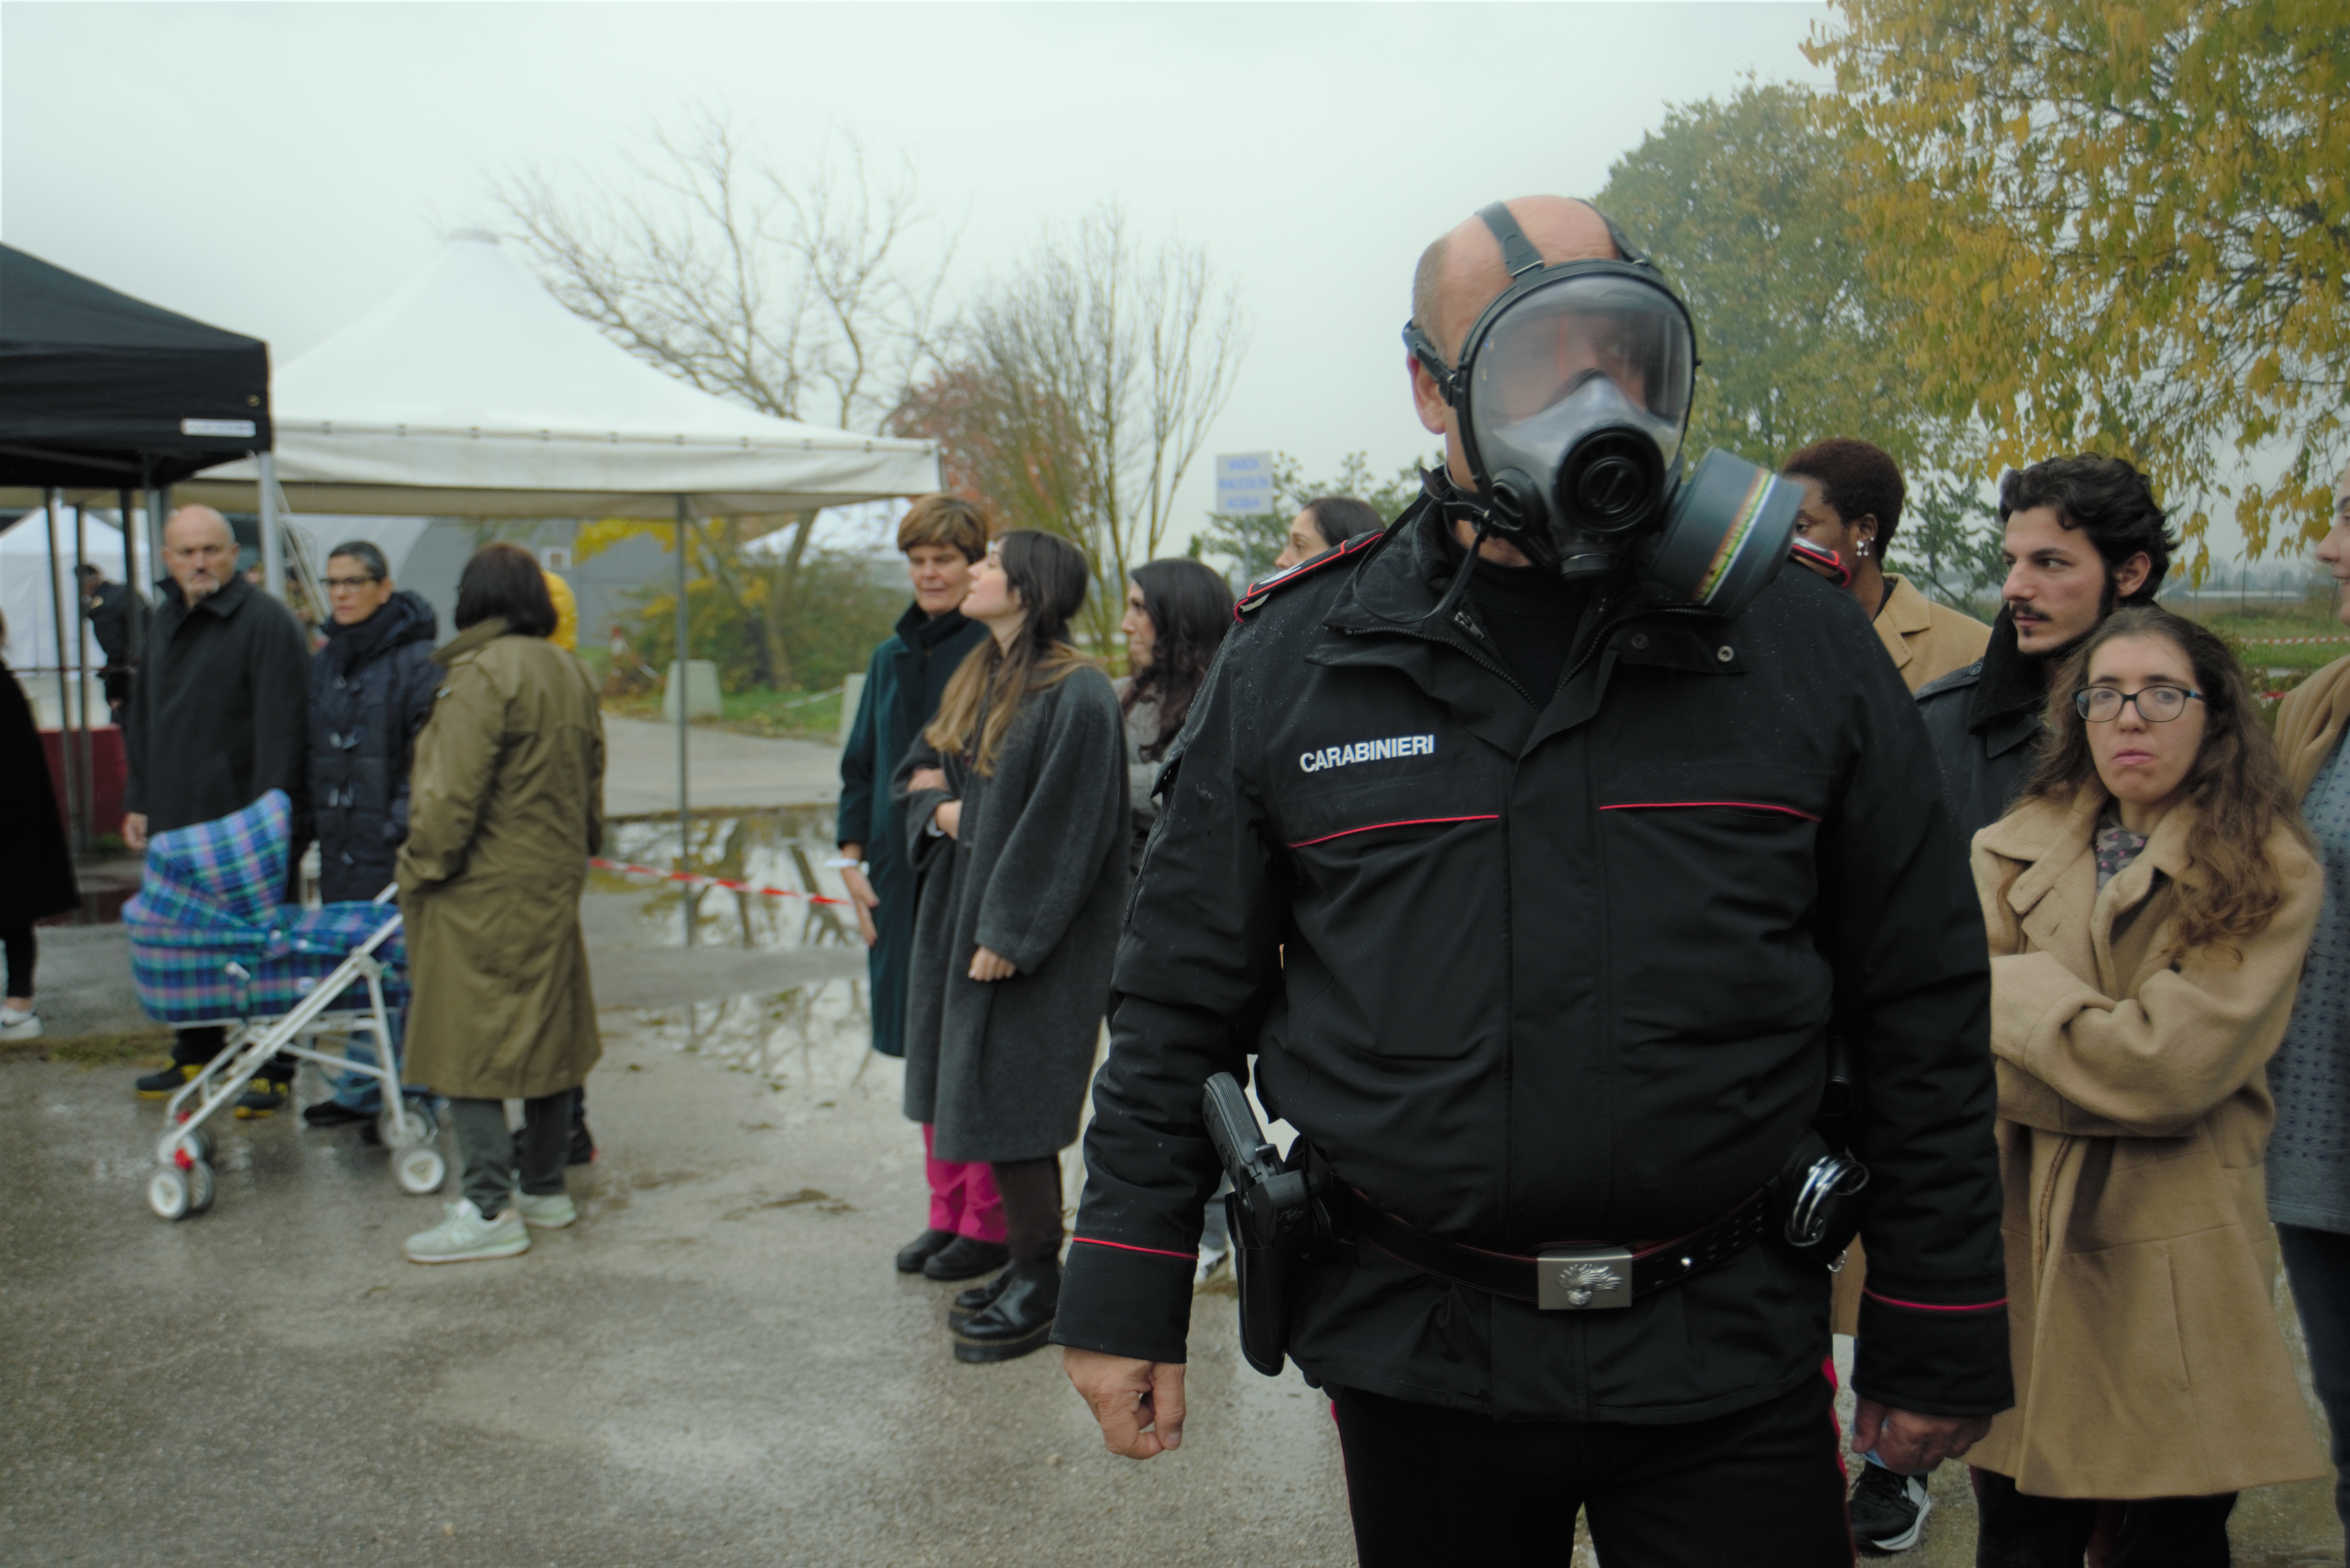 In the foreground, a carabinieri (man) in uniform wearing a respirator. In the background, around 12 volunteer participants are lined up and waiting.. The stroller/pram can be seen.